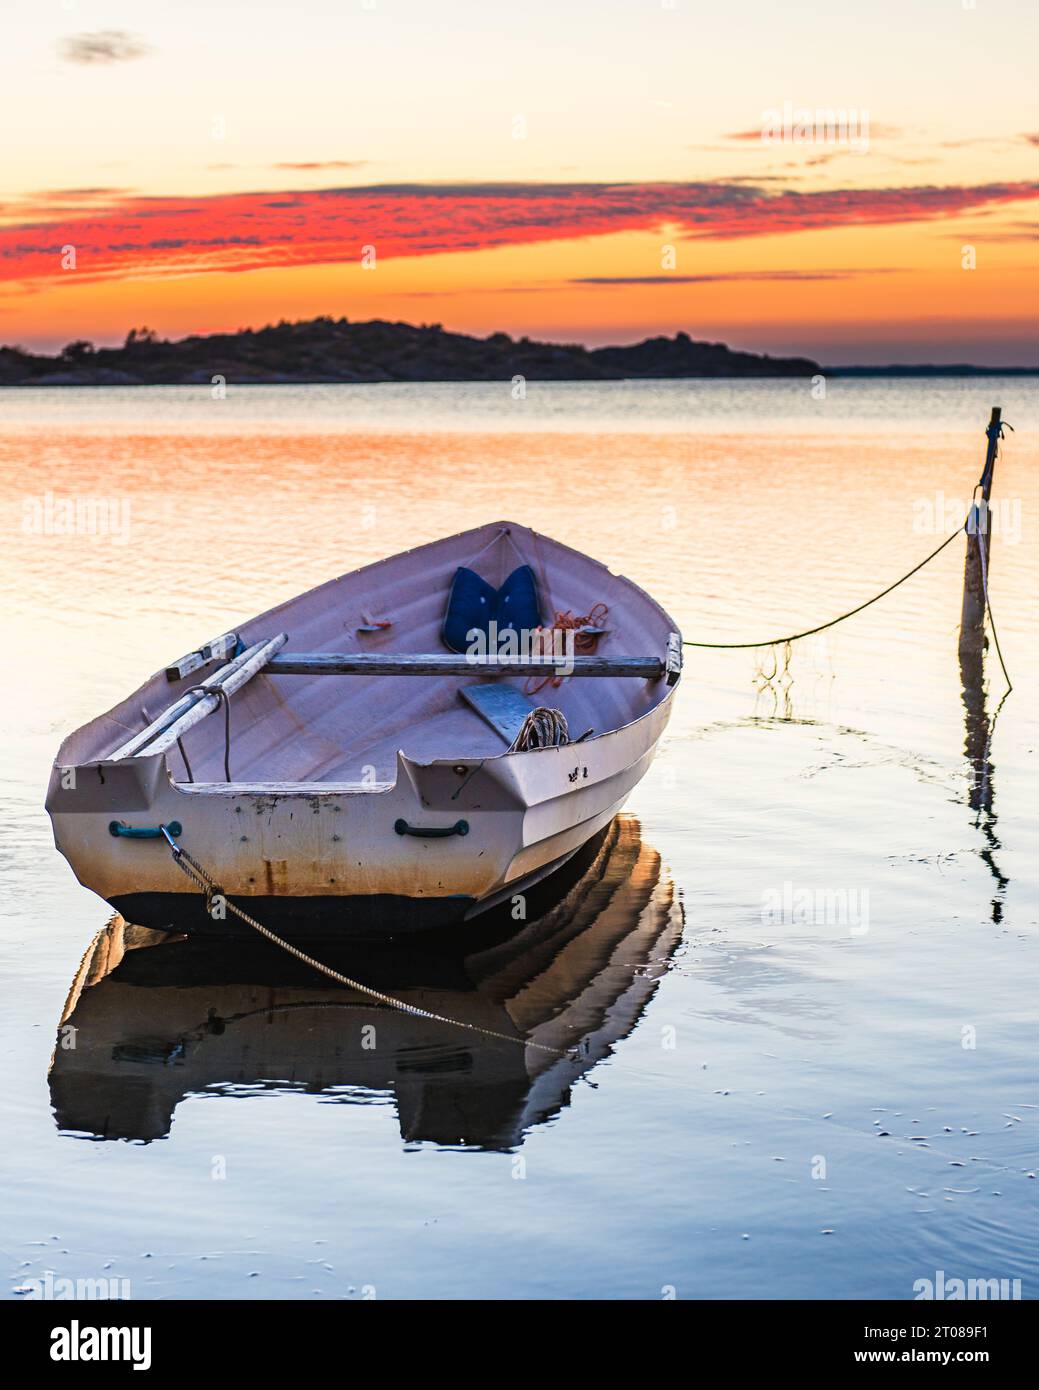 Moored nautical vessel at sunset, reflecting on calm ocean water. Stock Photo